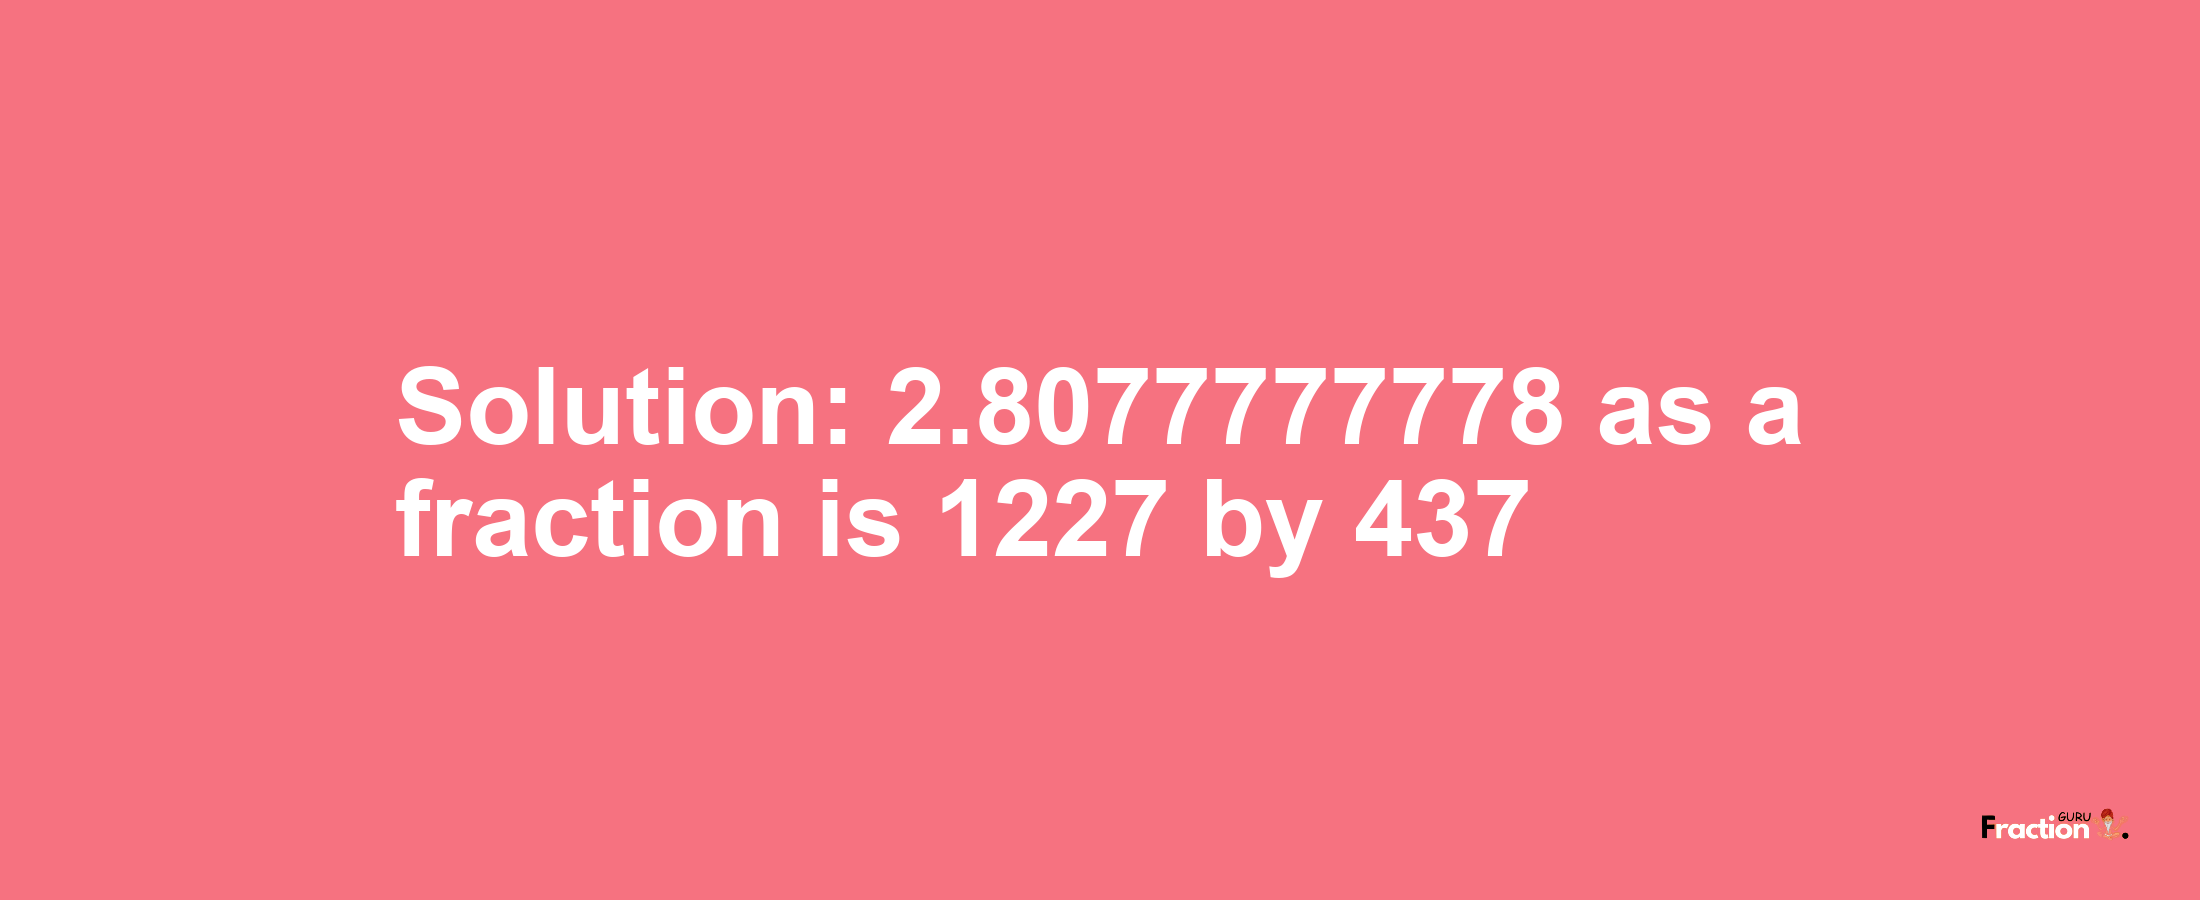 Solution:2.8077777778 as a fraction is 1227/437